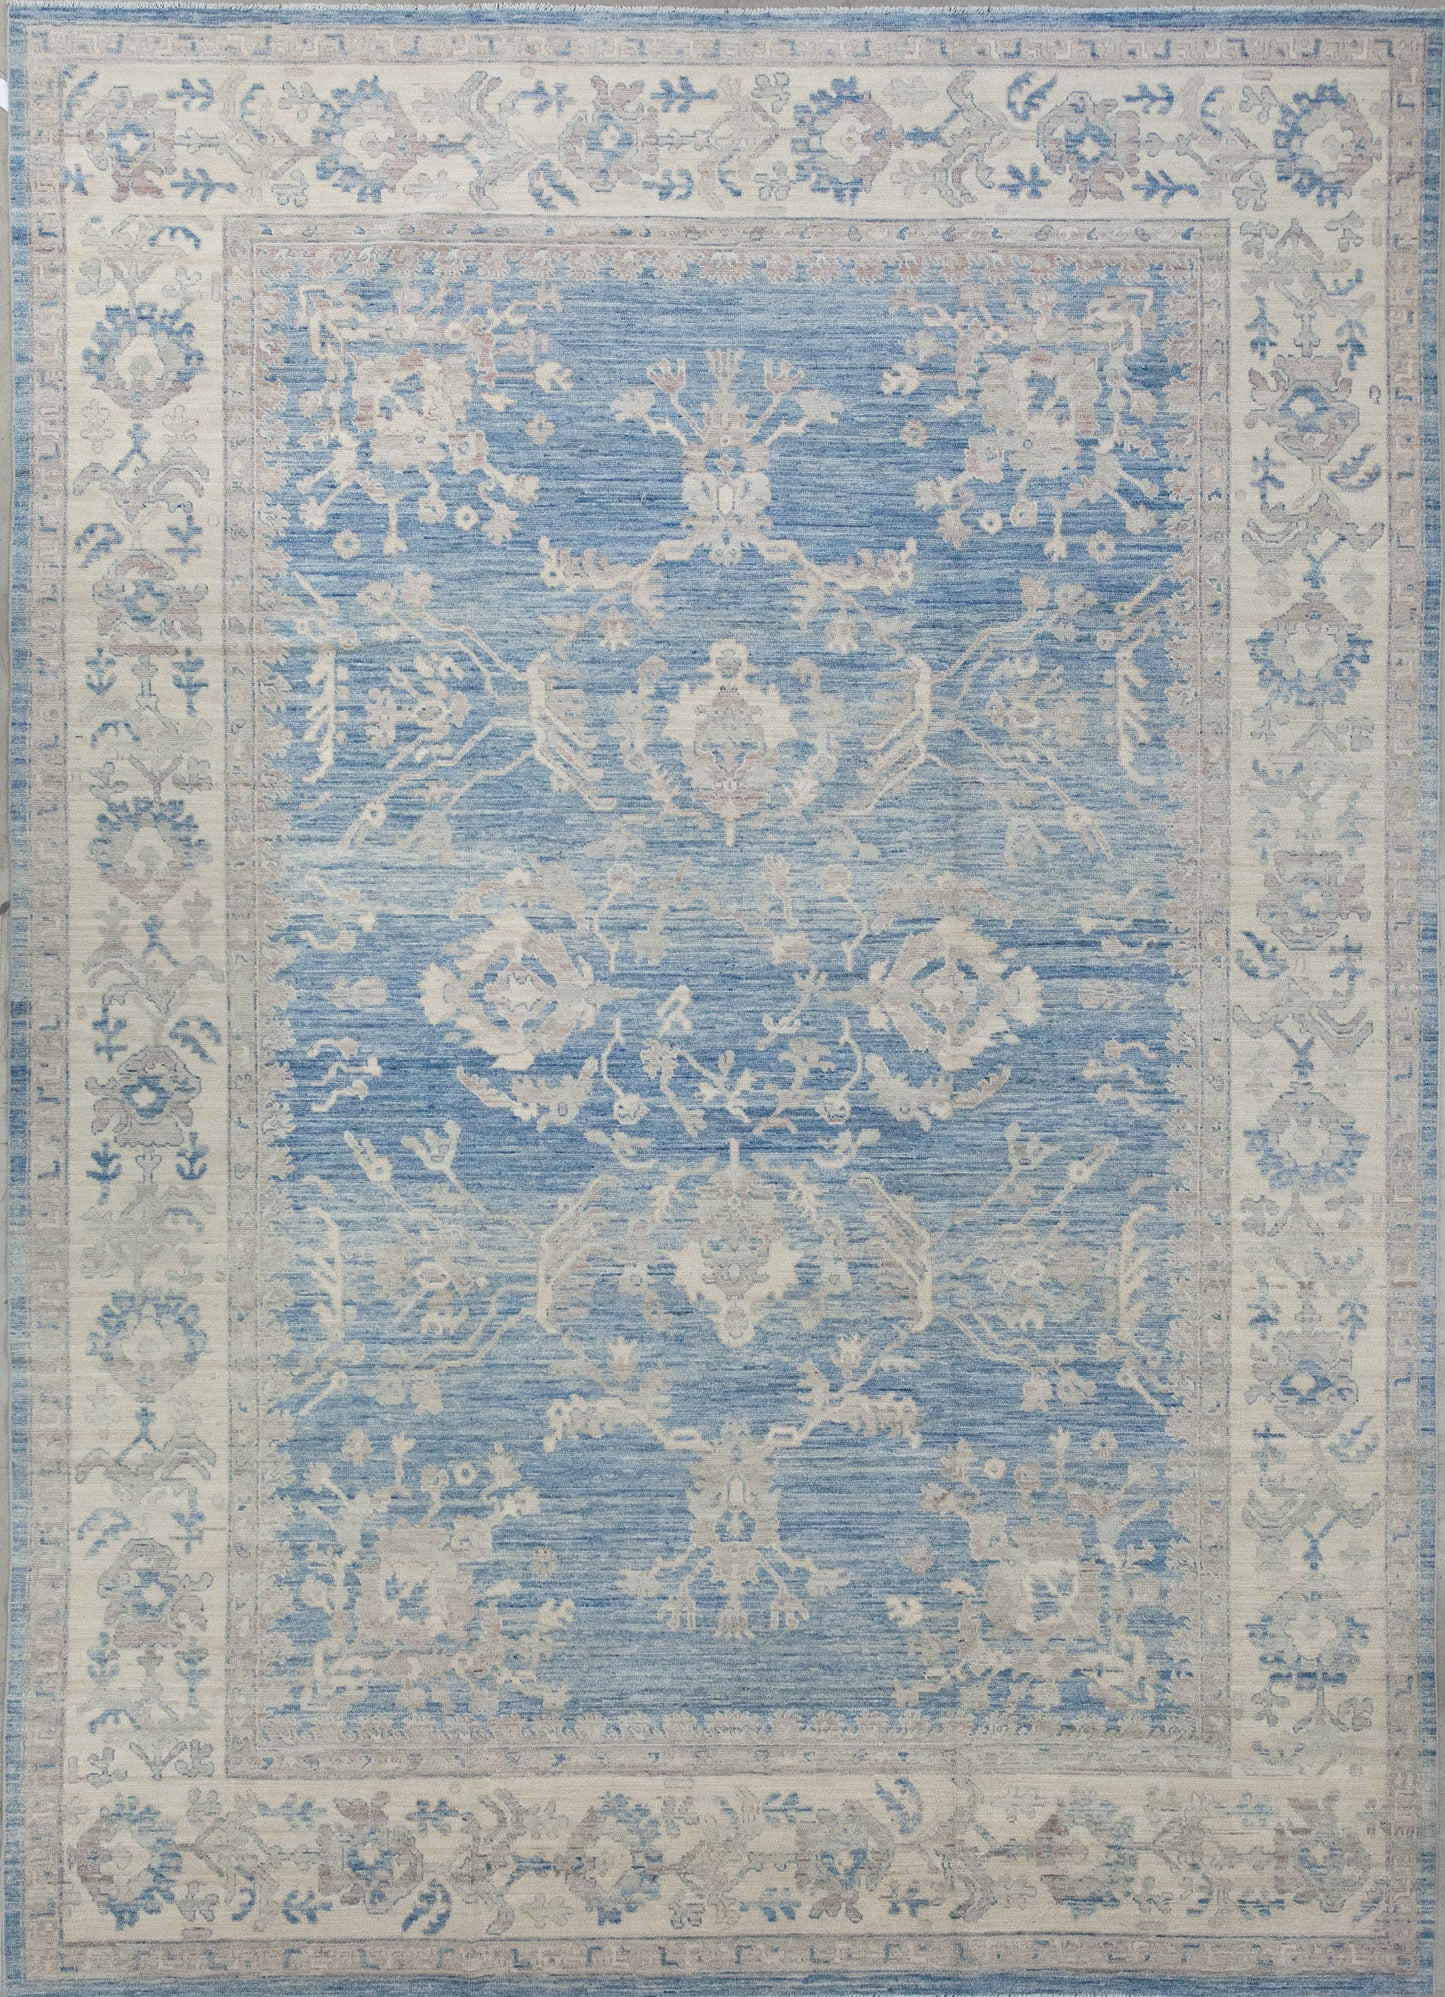 Beautiful classical carpet was woven with denim background, and beige contour. The two-tone color scheme makes this rug a smart purchase for your delight. 